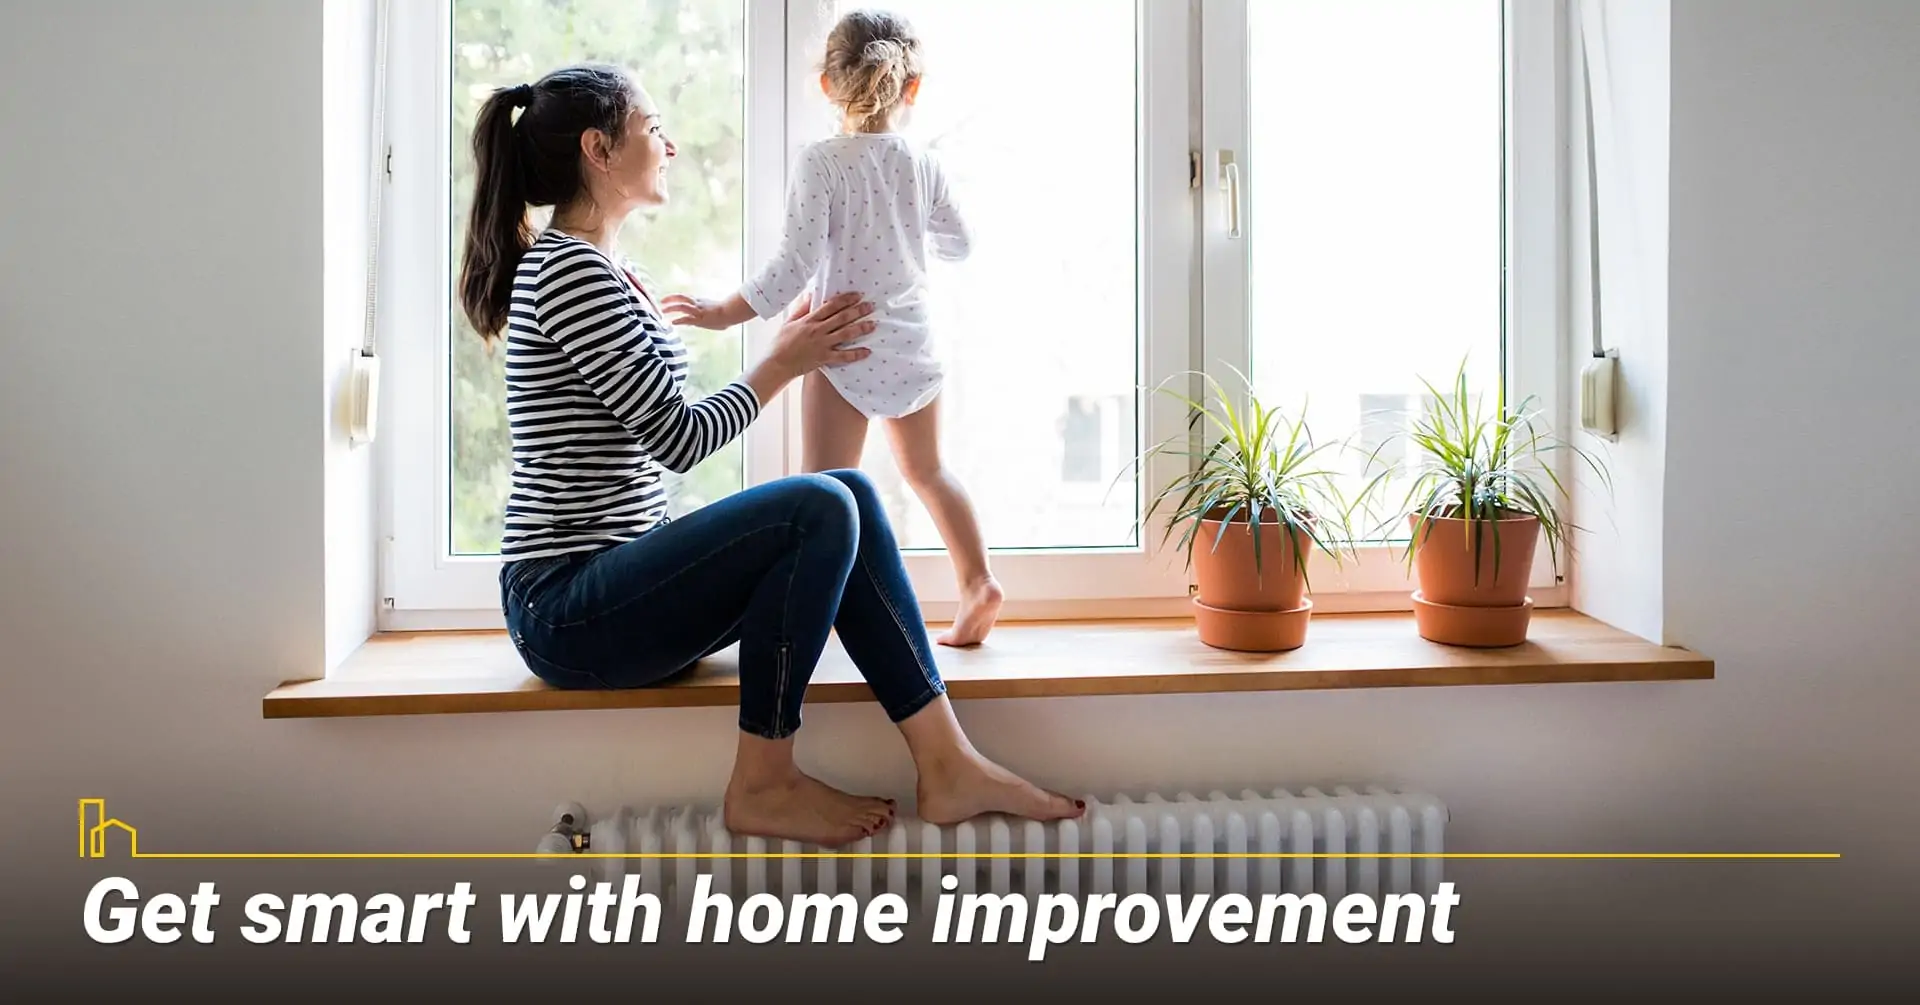 Get smart with home improvement, incorporate technology into your home improvement